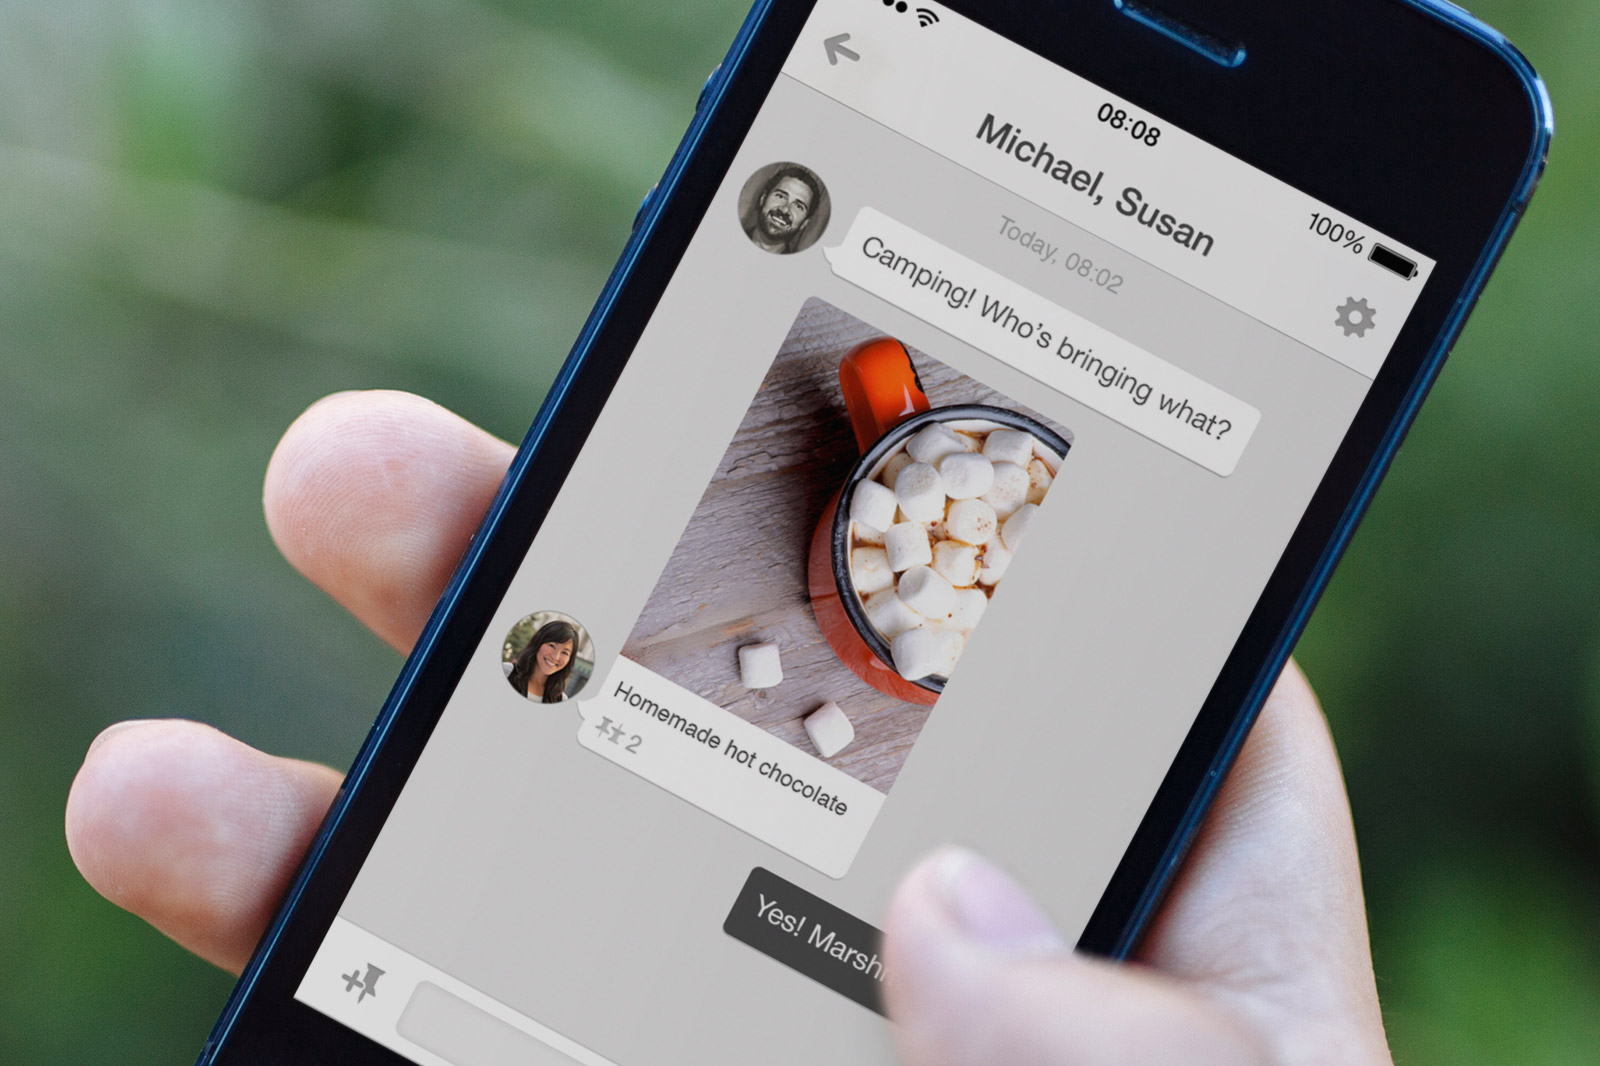 Pinterest Launches Messaging Feature to Discus Pins Privately